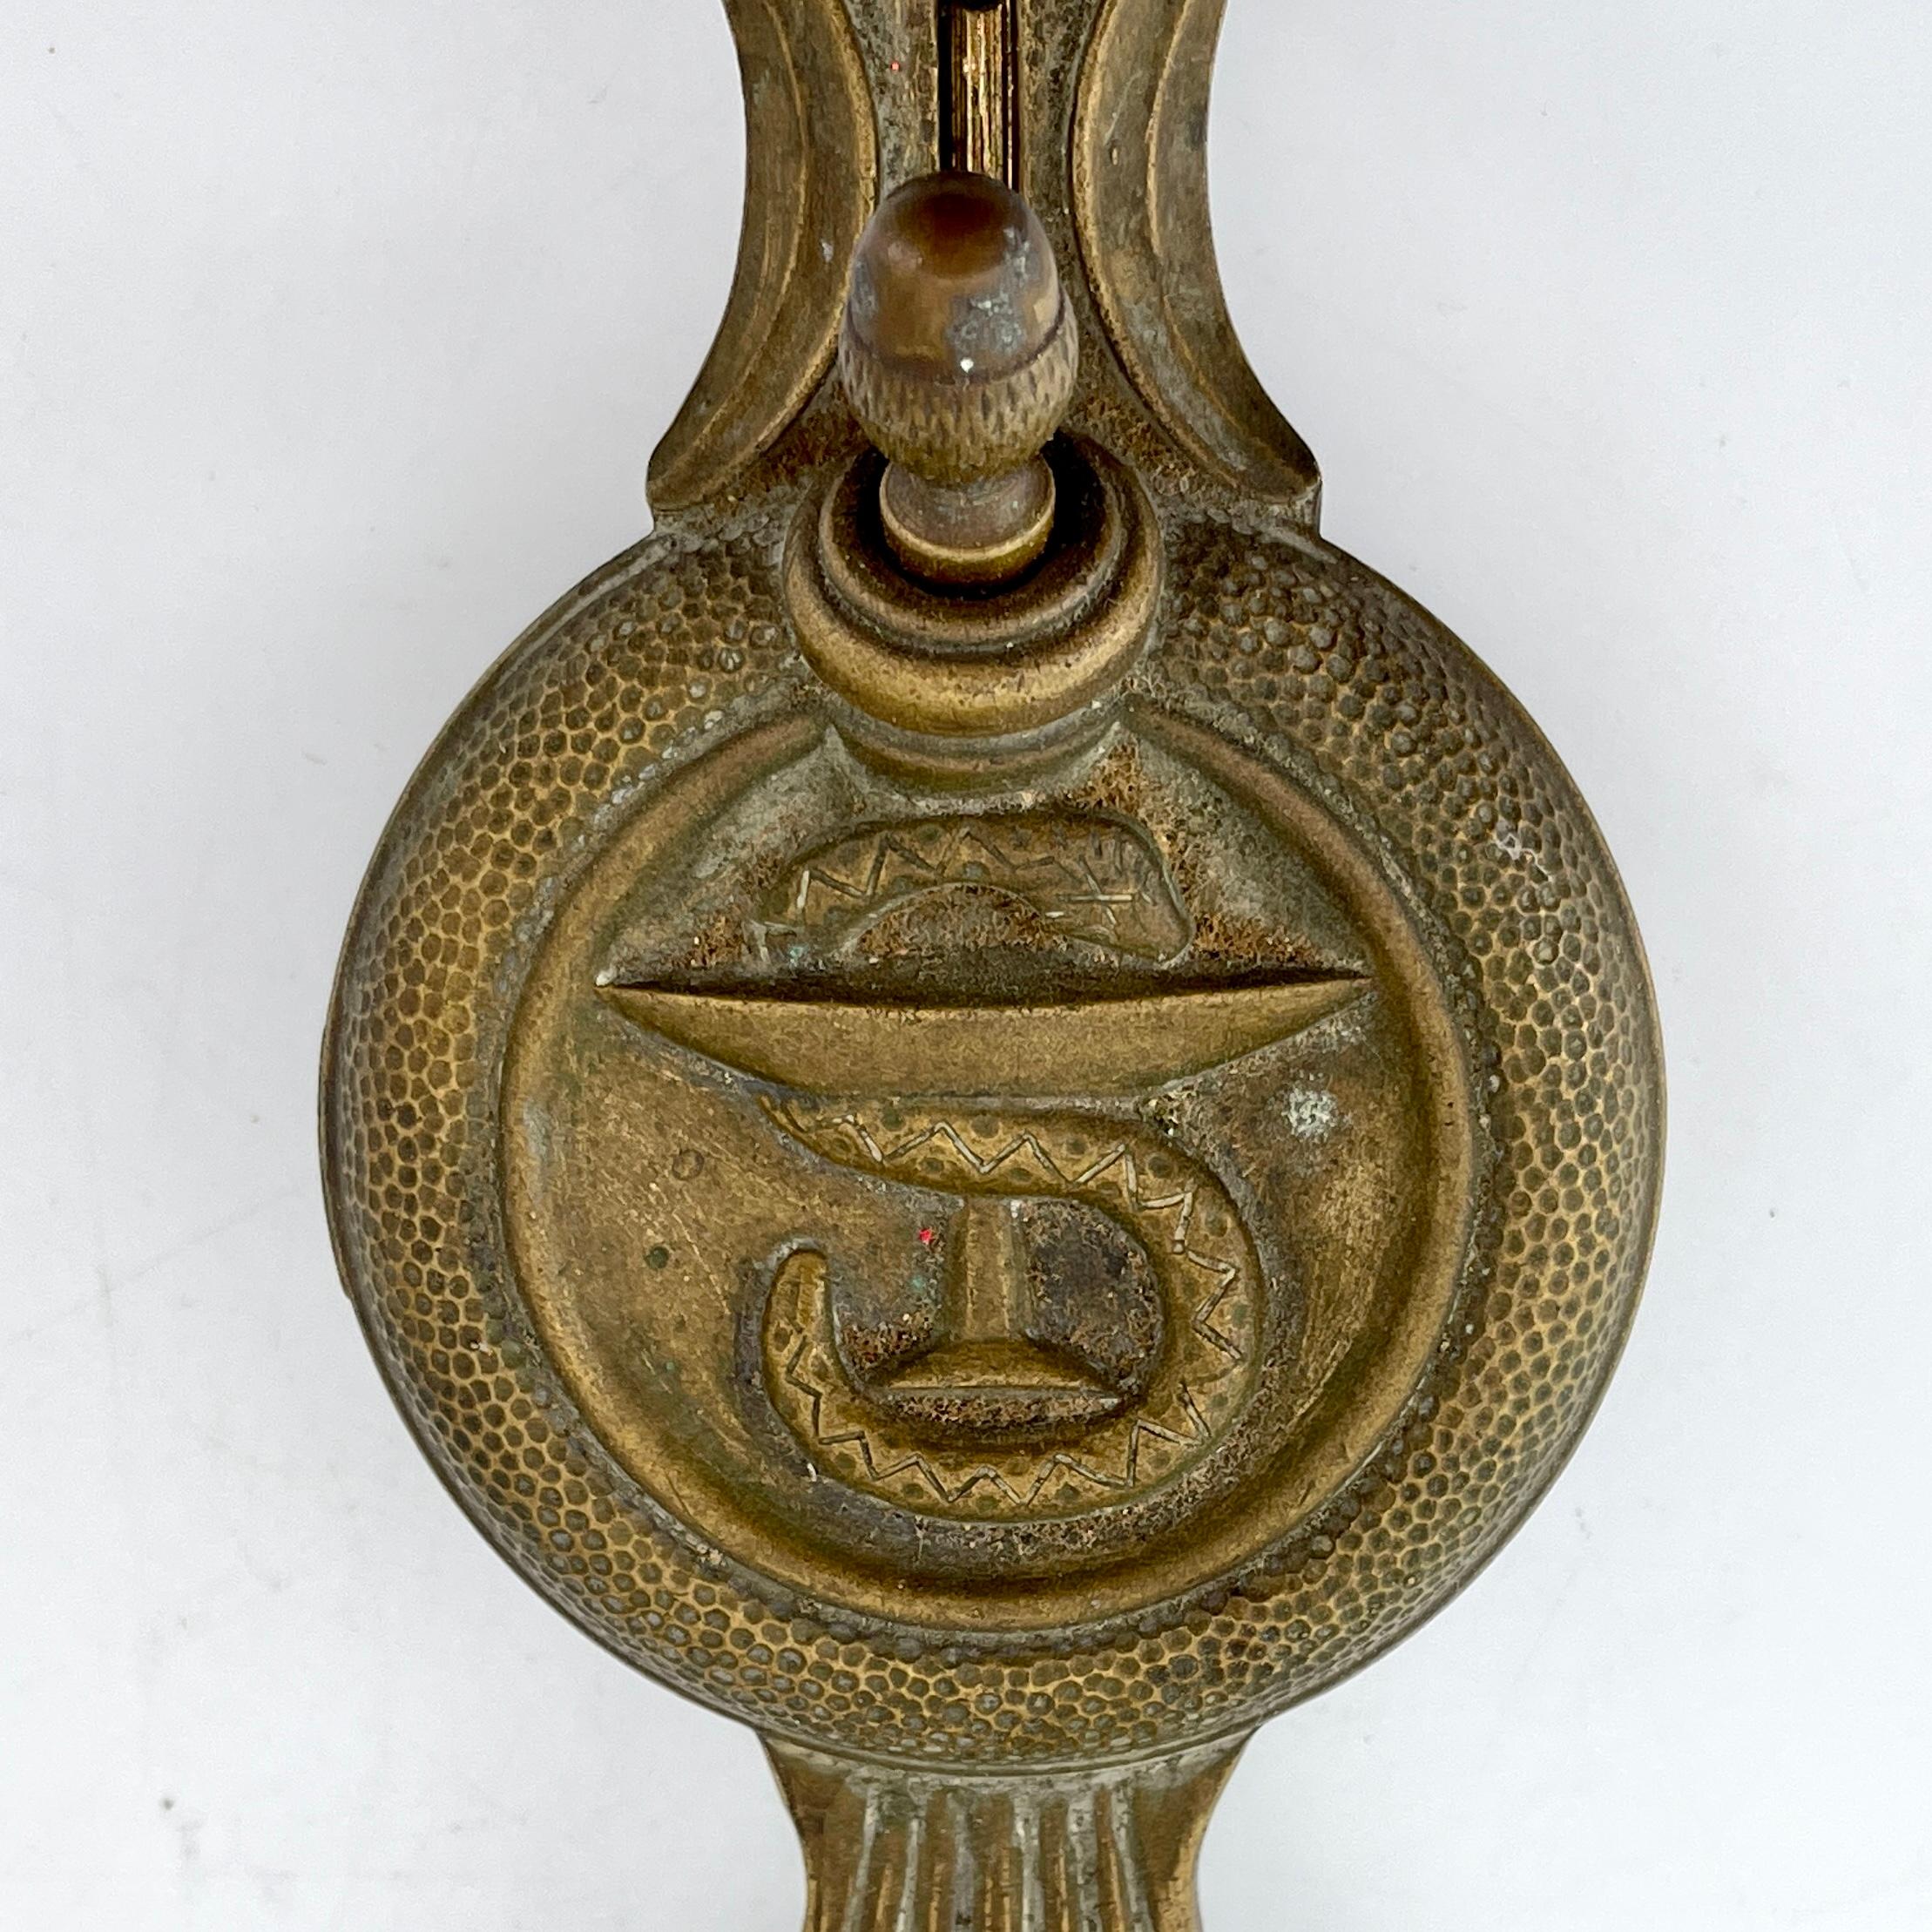 Heavy bronze striker/lighter with snake on martini glass or hygieia symbol for health.
Marked; Siegfried DDD (30) McMXXXVII (1937)
No flint included, so not making fire, sold as-is, as a prop.

Measures: L 6.25 x W 2.75 x H 1.75 in.
1.05 lbs.